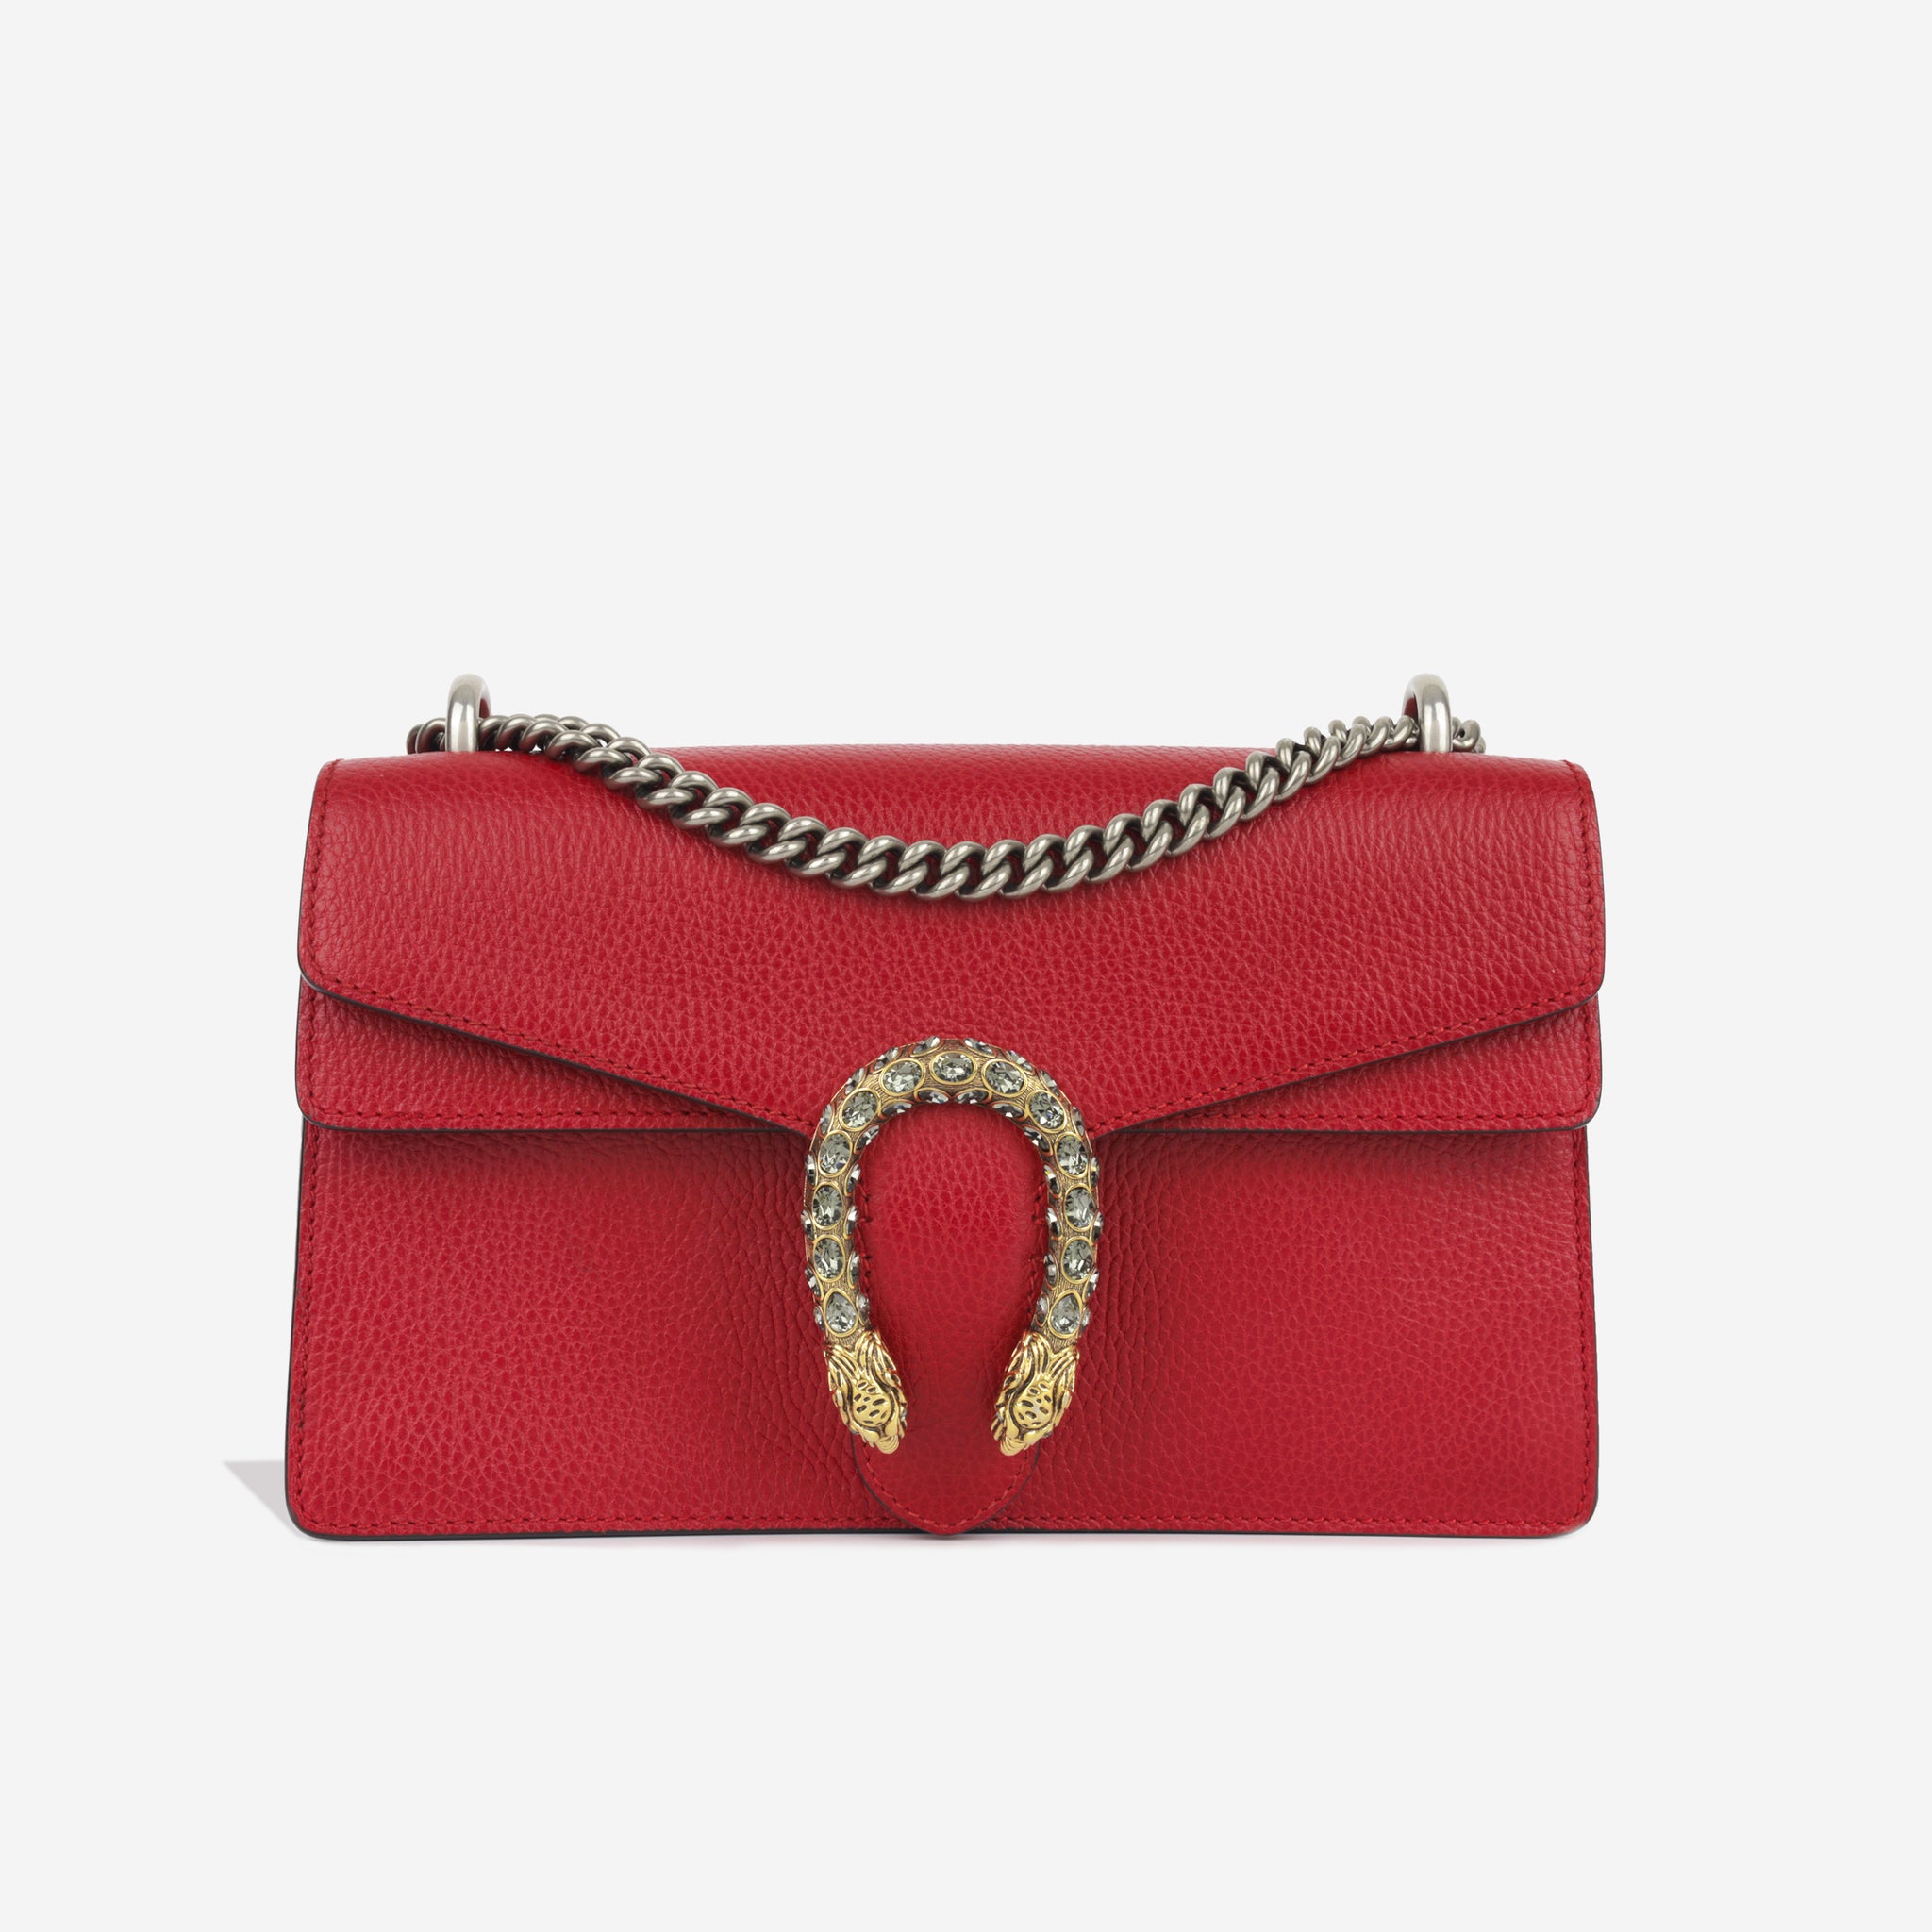 Gucci marmont red velvet bag , it's been a year... - Depop #red #gucci #bag  #redguccibag | Red gucci bag, Bags, Fashion handbags